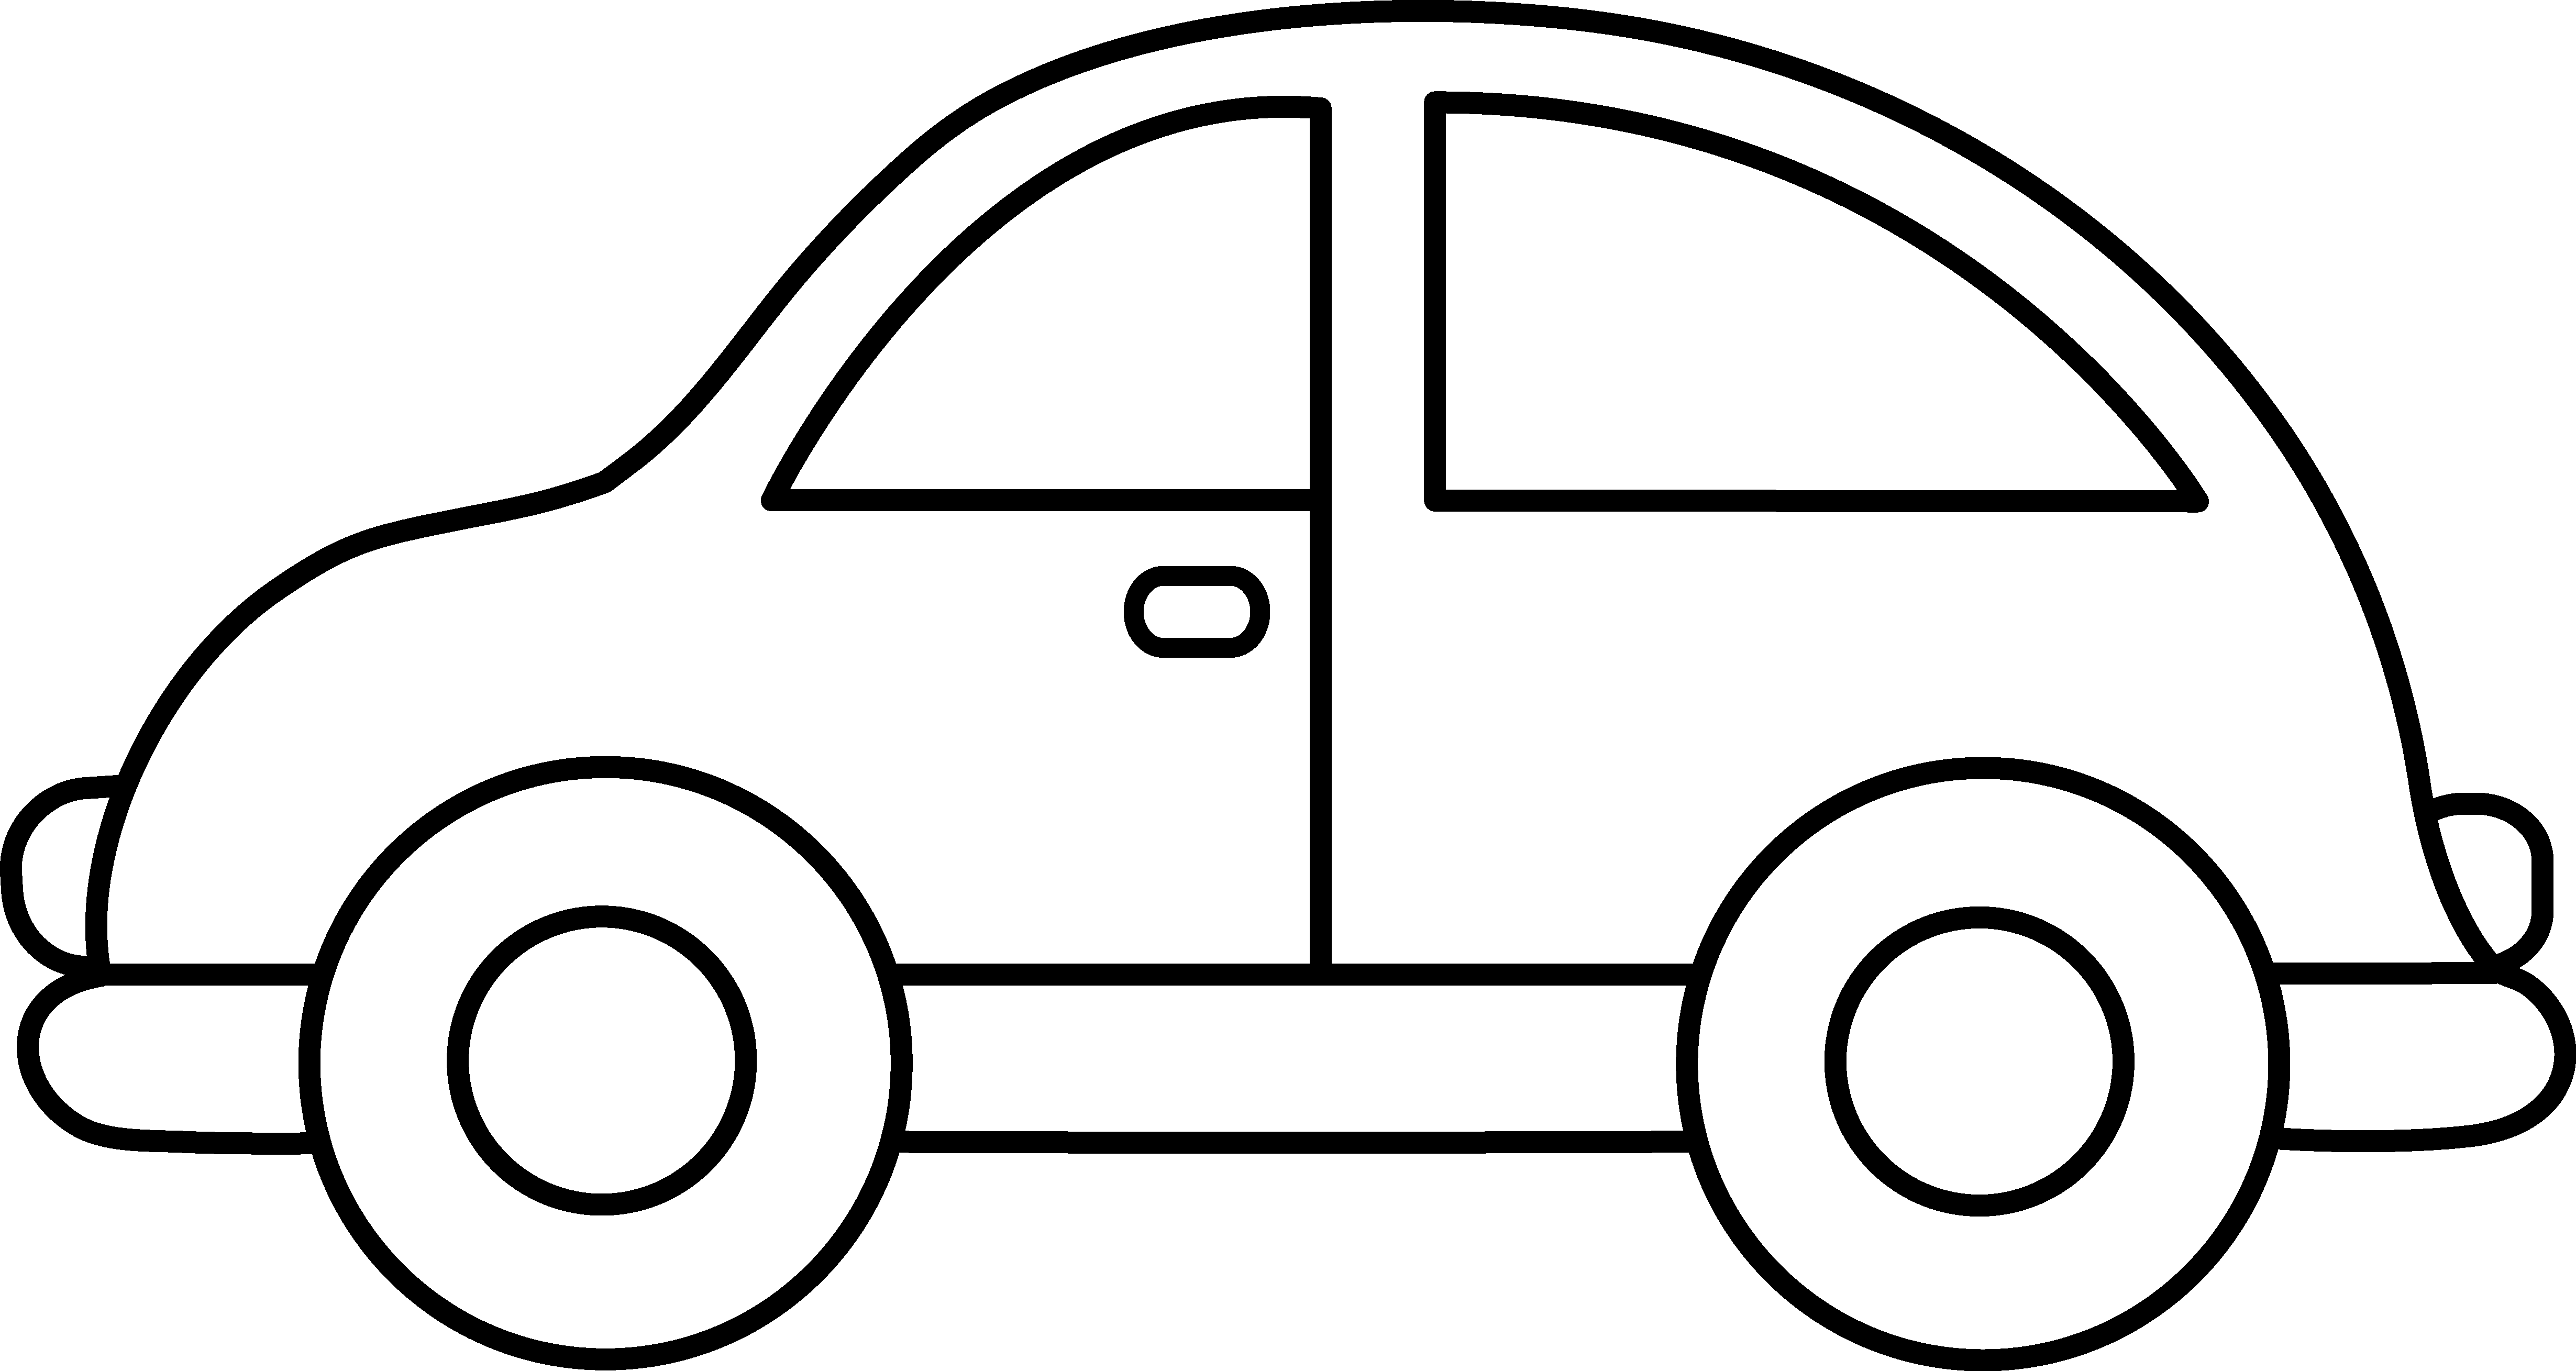 Silhouette at getdrawings com. Engine clipart draw car